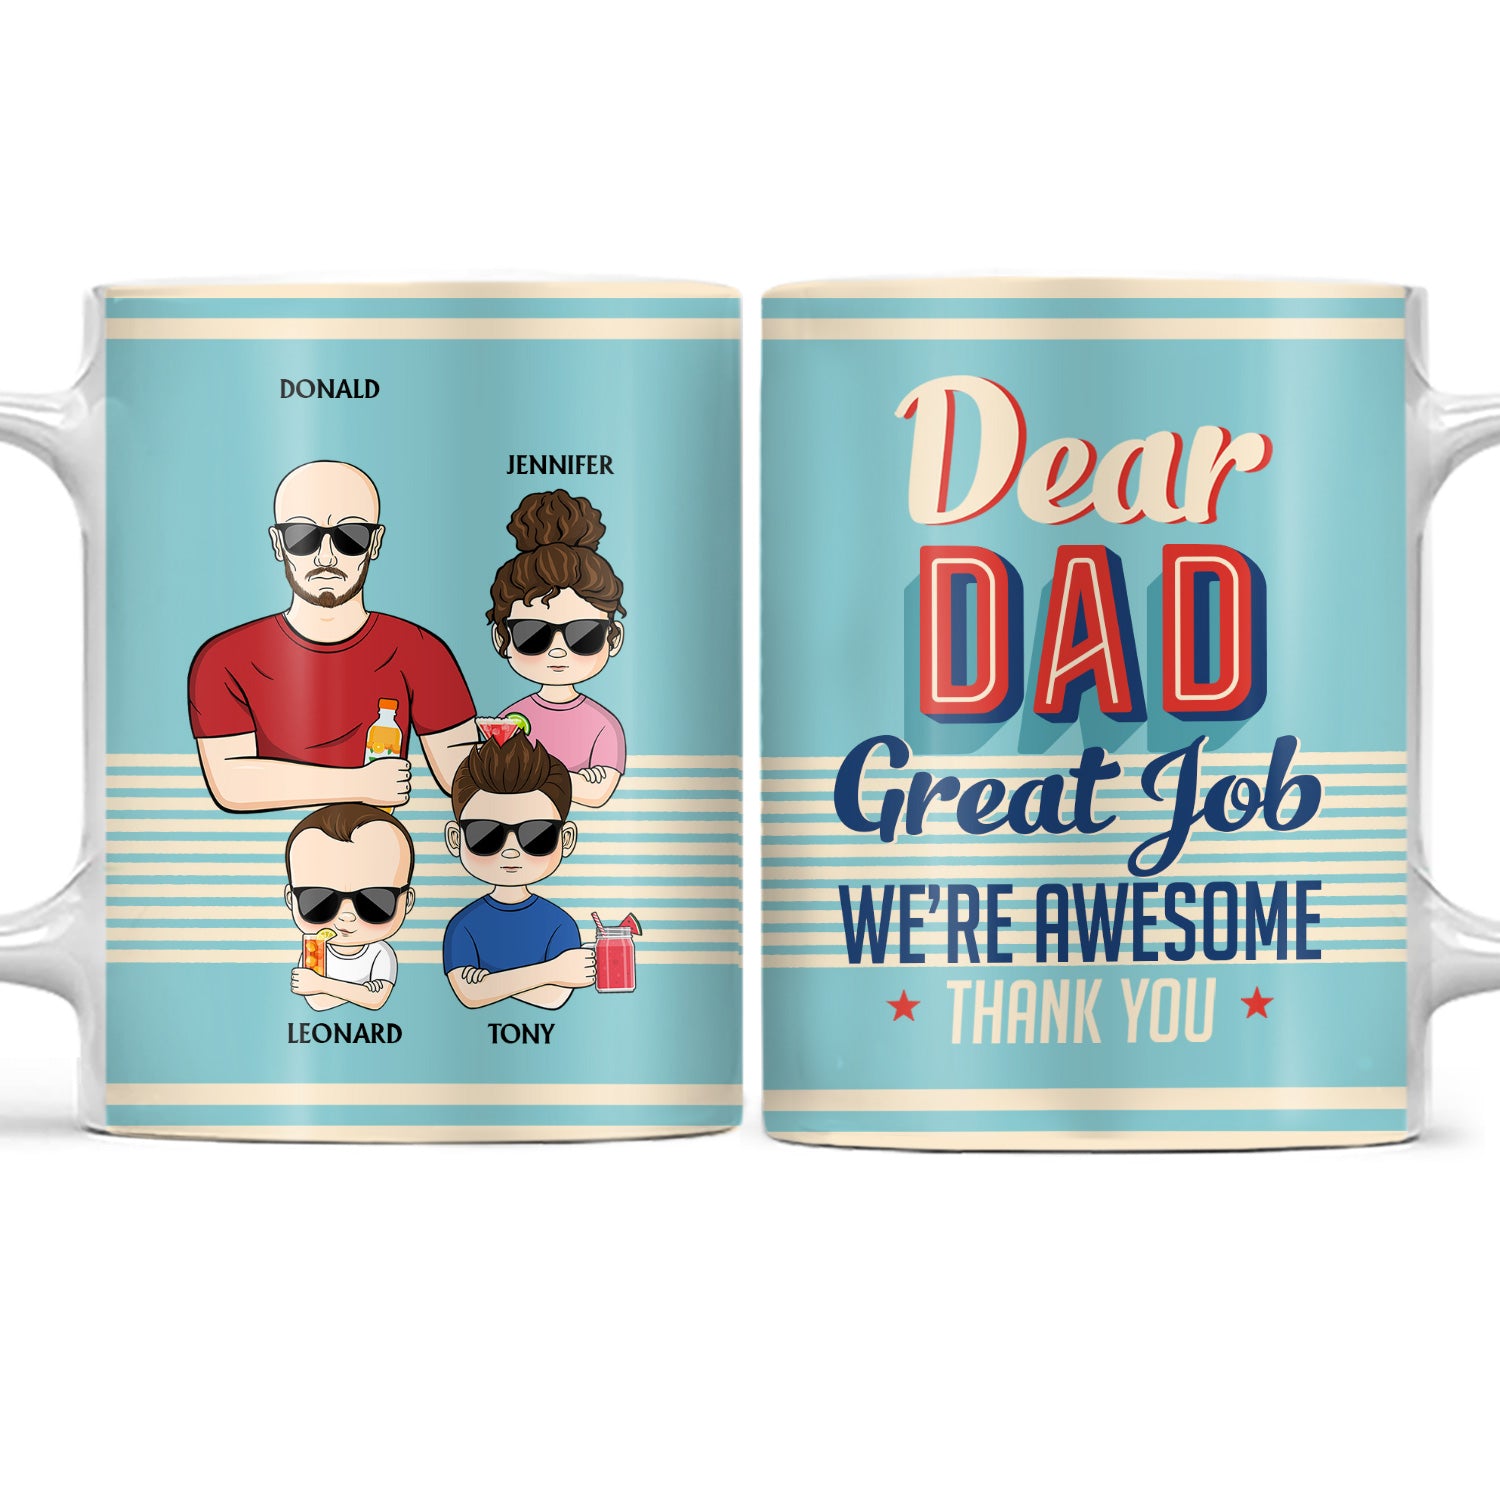 Dear Dad Great Job We're Awesome Thank You Young - Birthday, Loving Gift For Dad, Father, Grandpa, Grandfather - Personalized Custom White Edge-to-Edge Mug